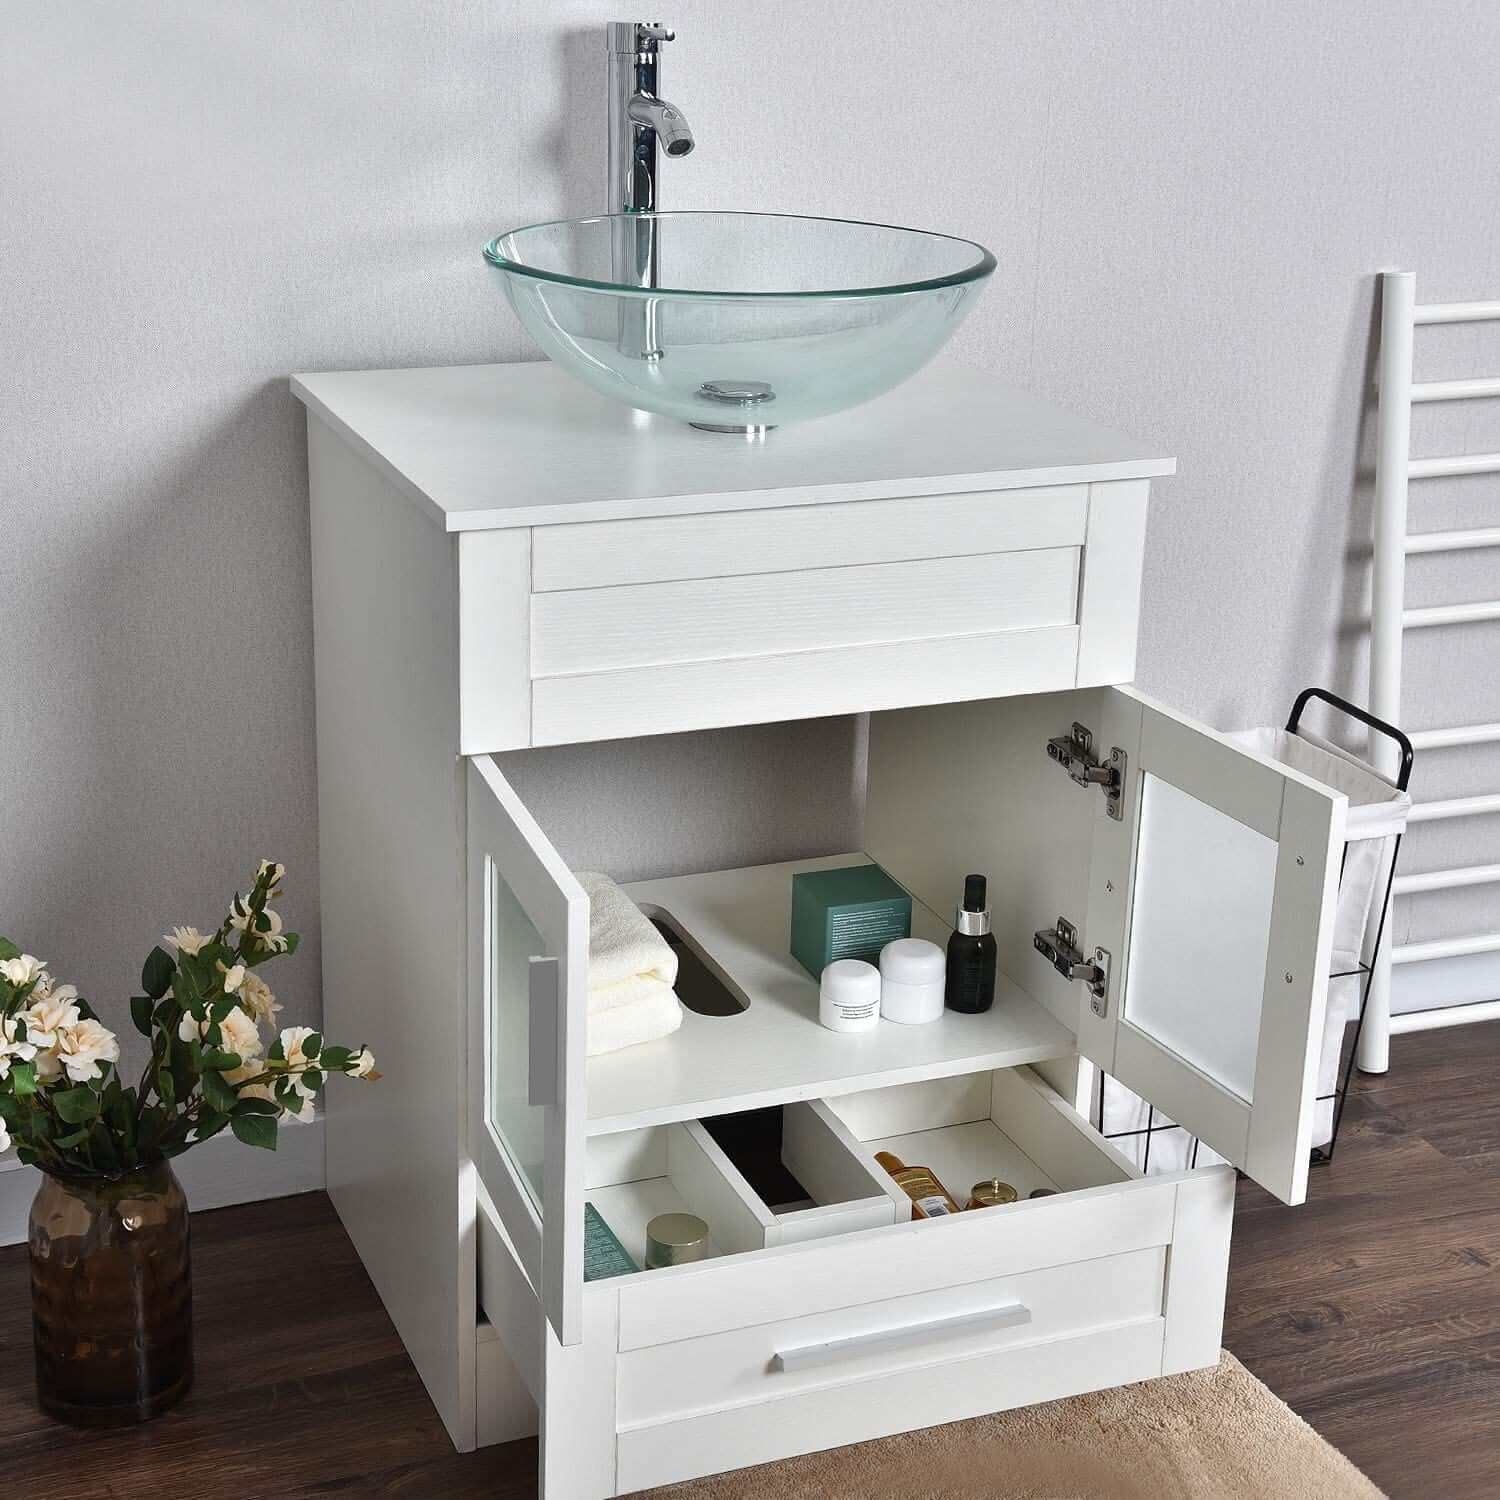 Elecwish bathroom vanitiy cabinet has drawers which provides ample storage spaces